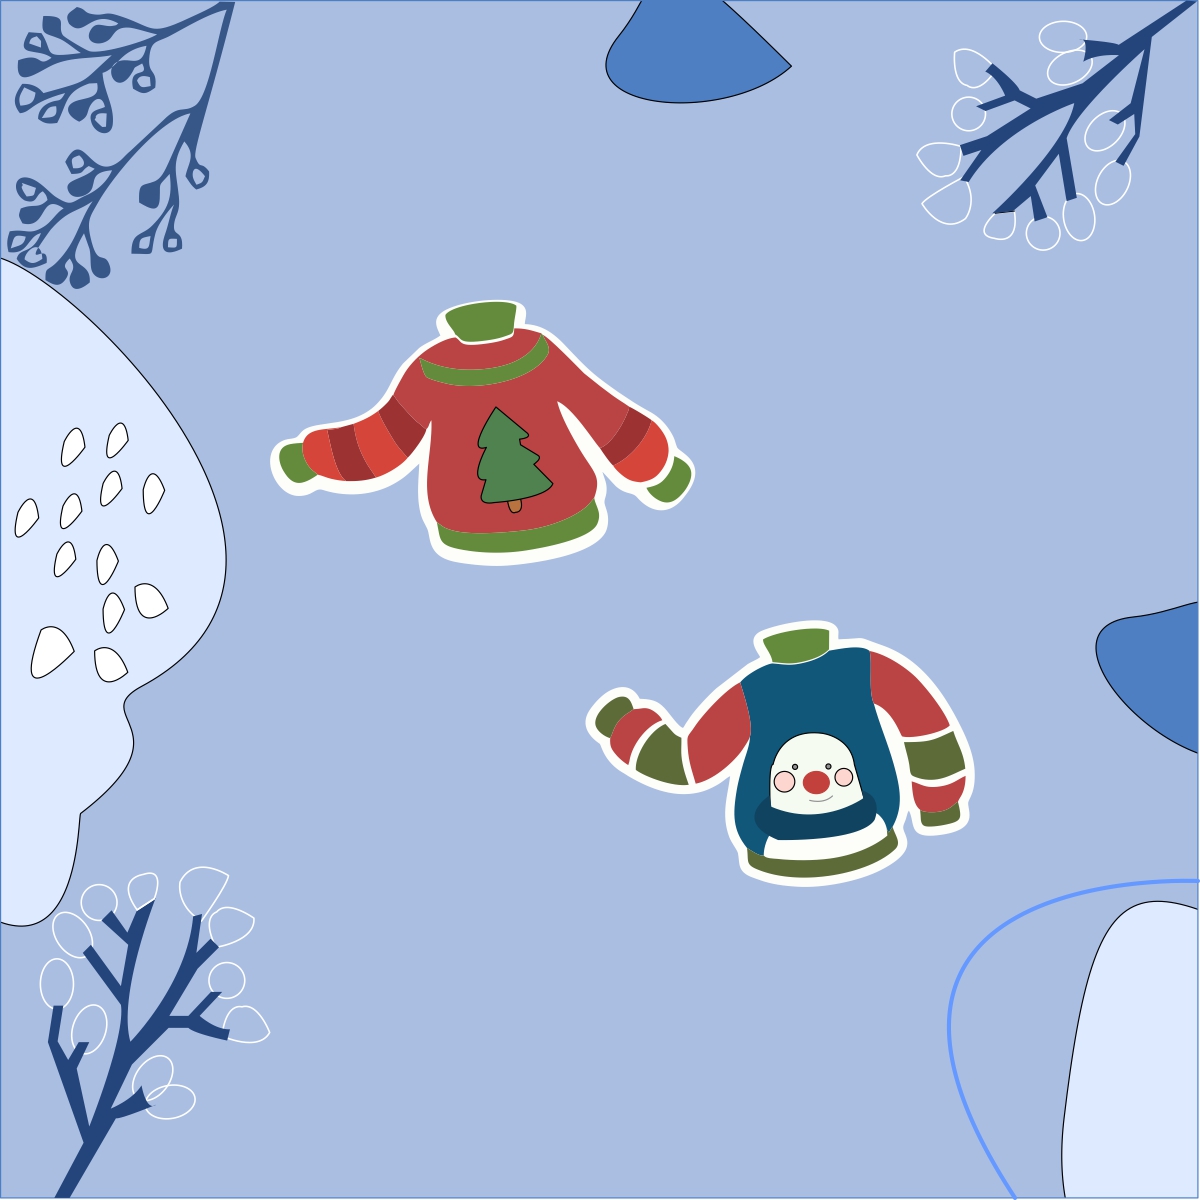 WINTER SALE TEMPLATE WITH SWEATER